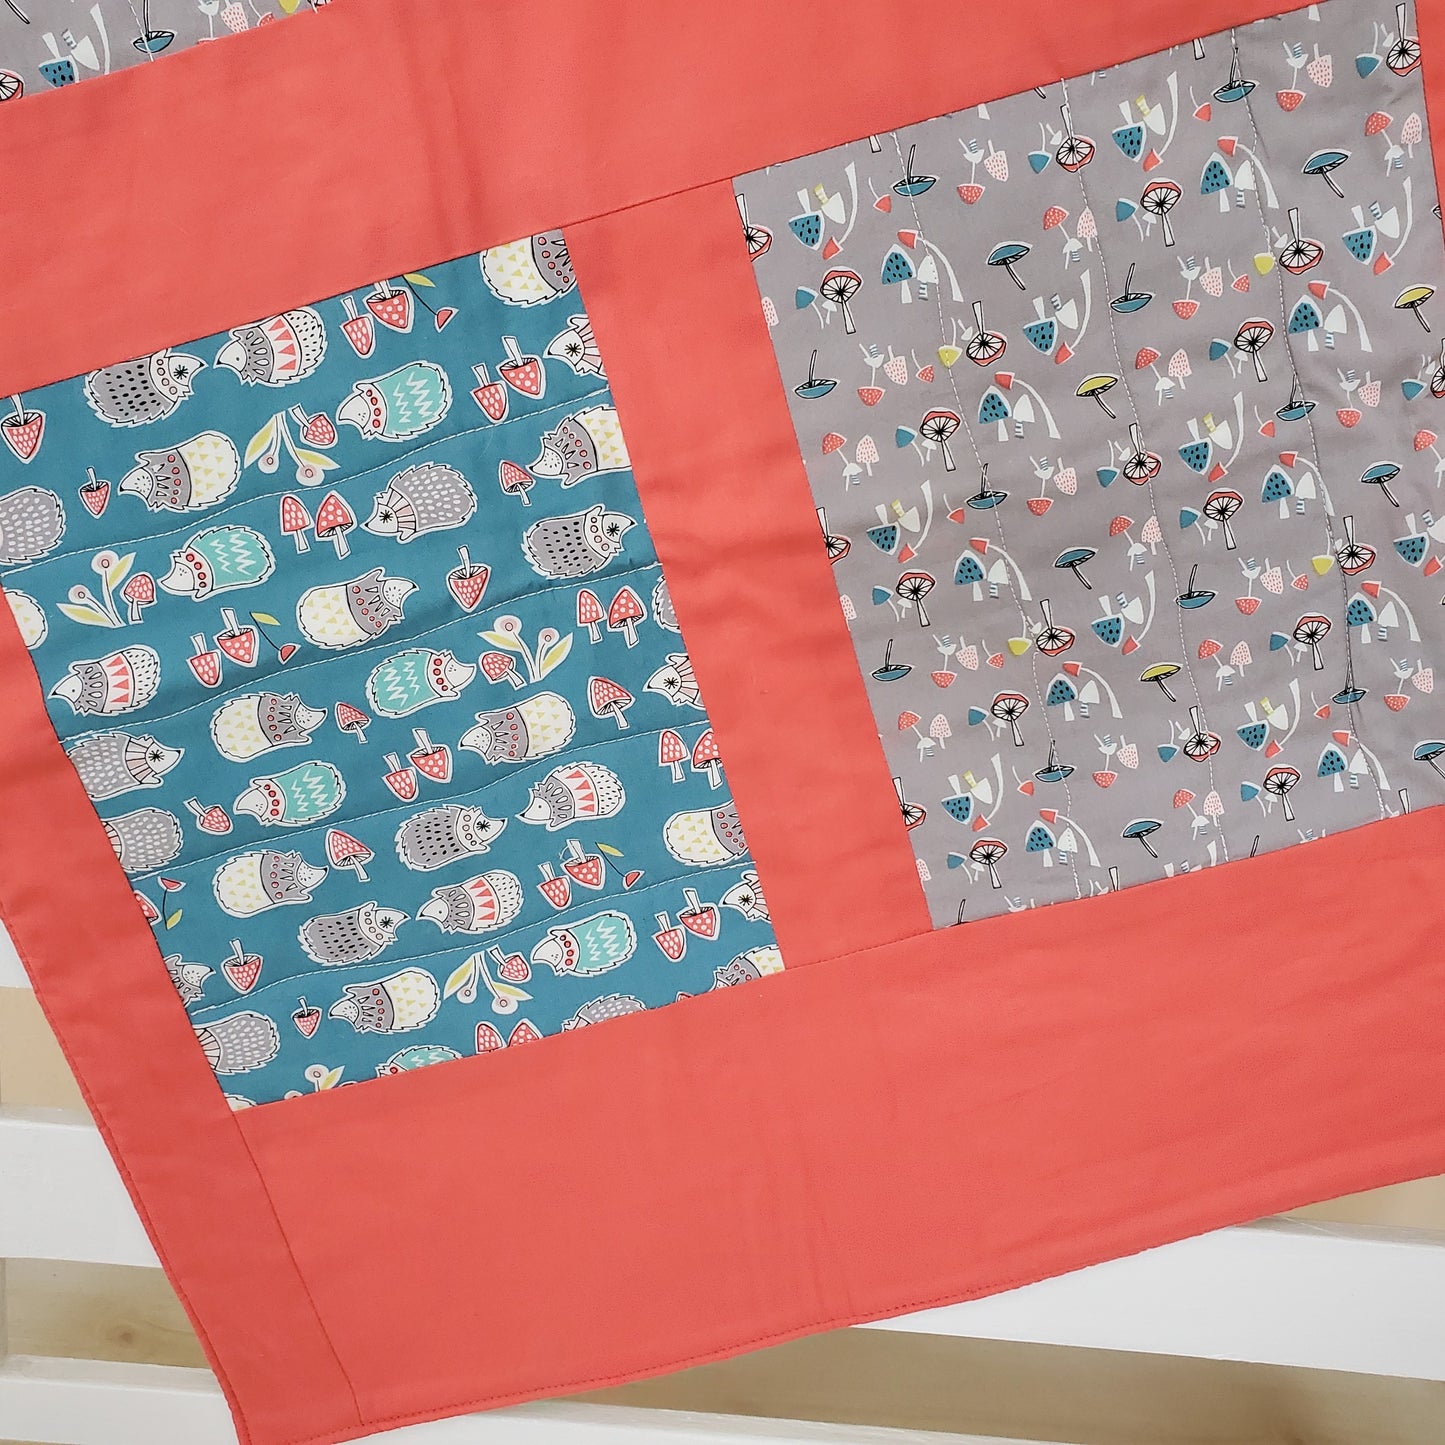 Organic Cotton Baby & Toddler Quilt with Hedgehogs